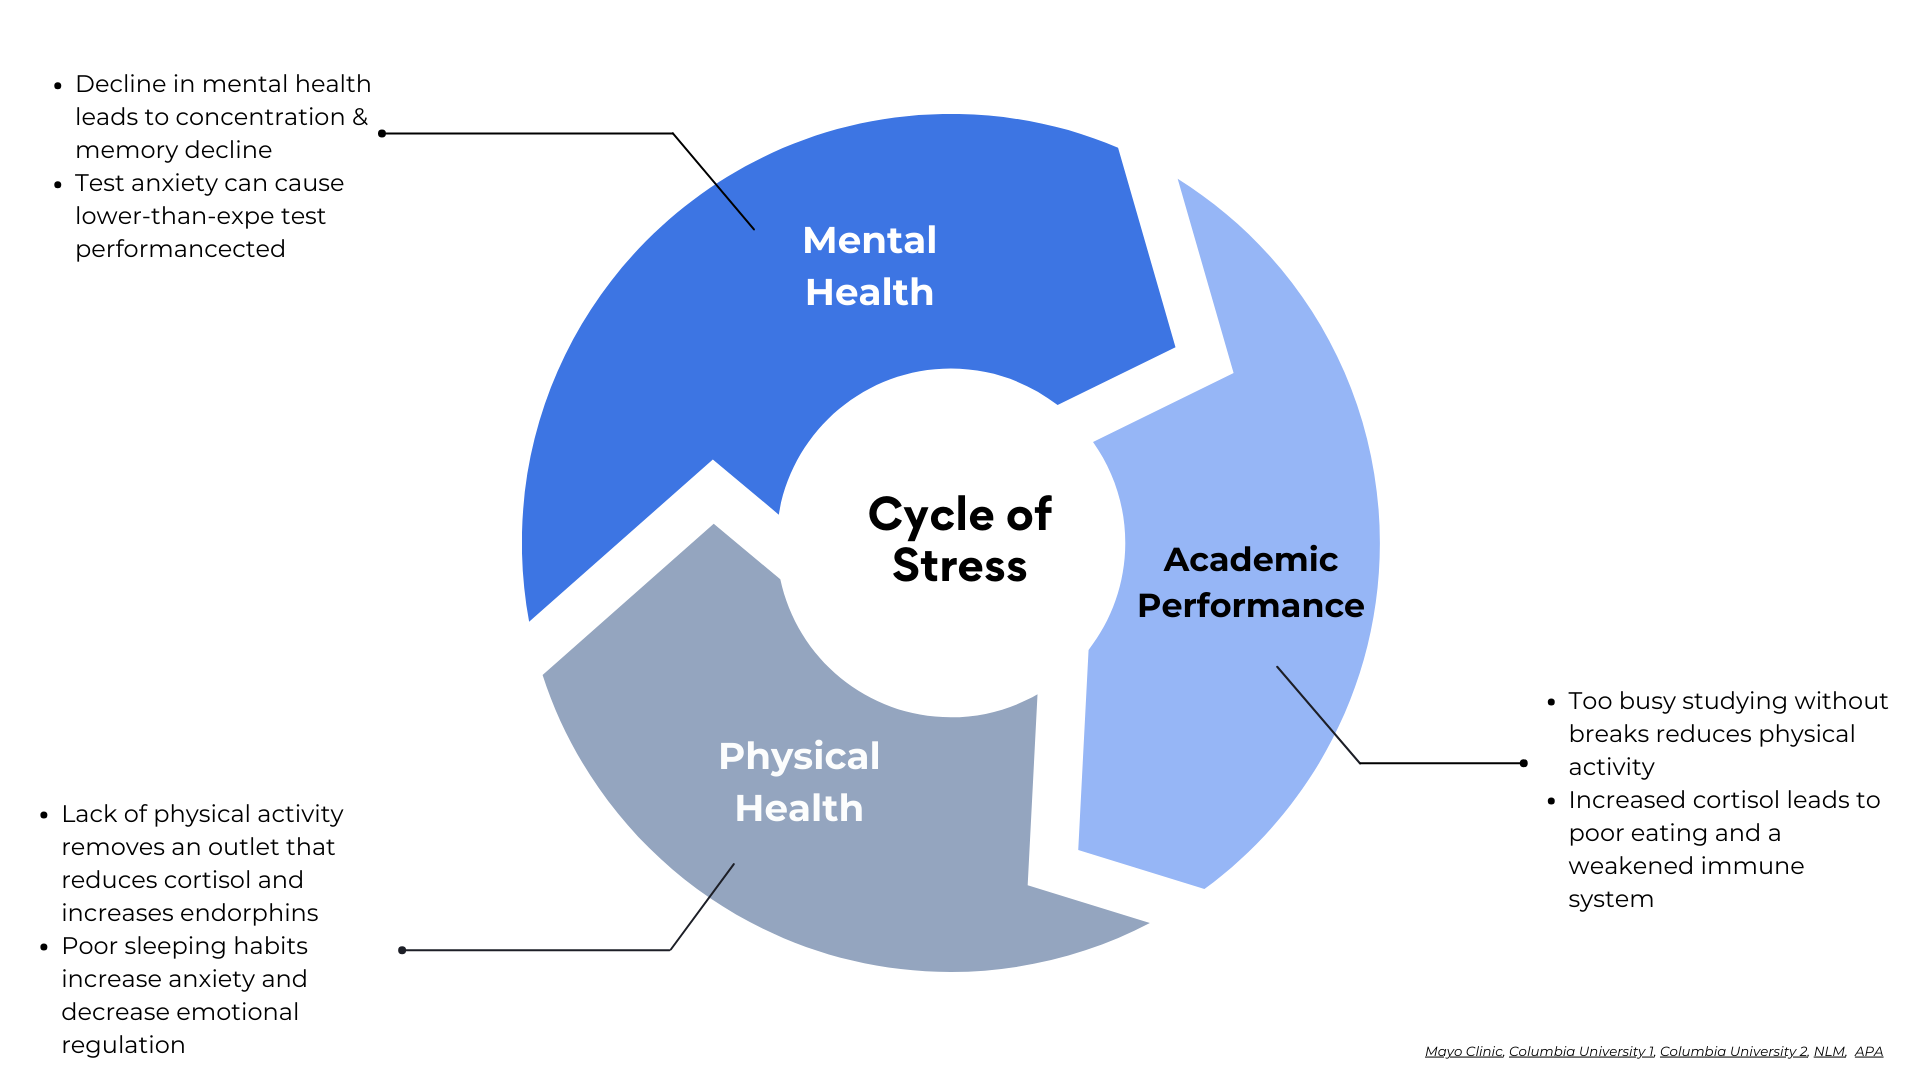 Cycle of Stress: Mental Health: decline in mental health leads to concentration & memory decline; test anxiety can cause lower-than-expected performance. Academic Performance: too busy studying without breaks reduces physical activity; increased cortisol leads to poor eating and a weakened immune system. Physical Health: lack of physical activity removes an outlet that reduces cortisol and increases endorphins; poor sleeping habits increase anxiety and decrease emotional regulation.